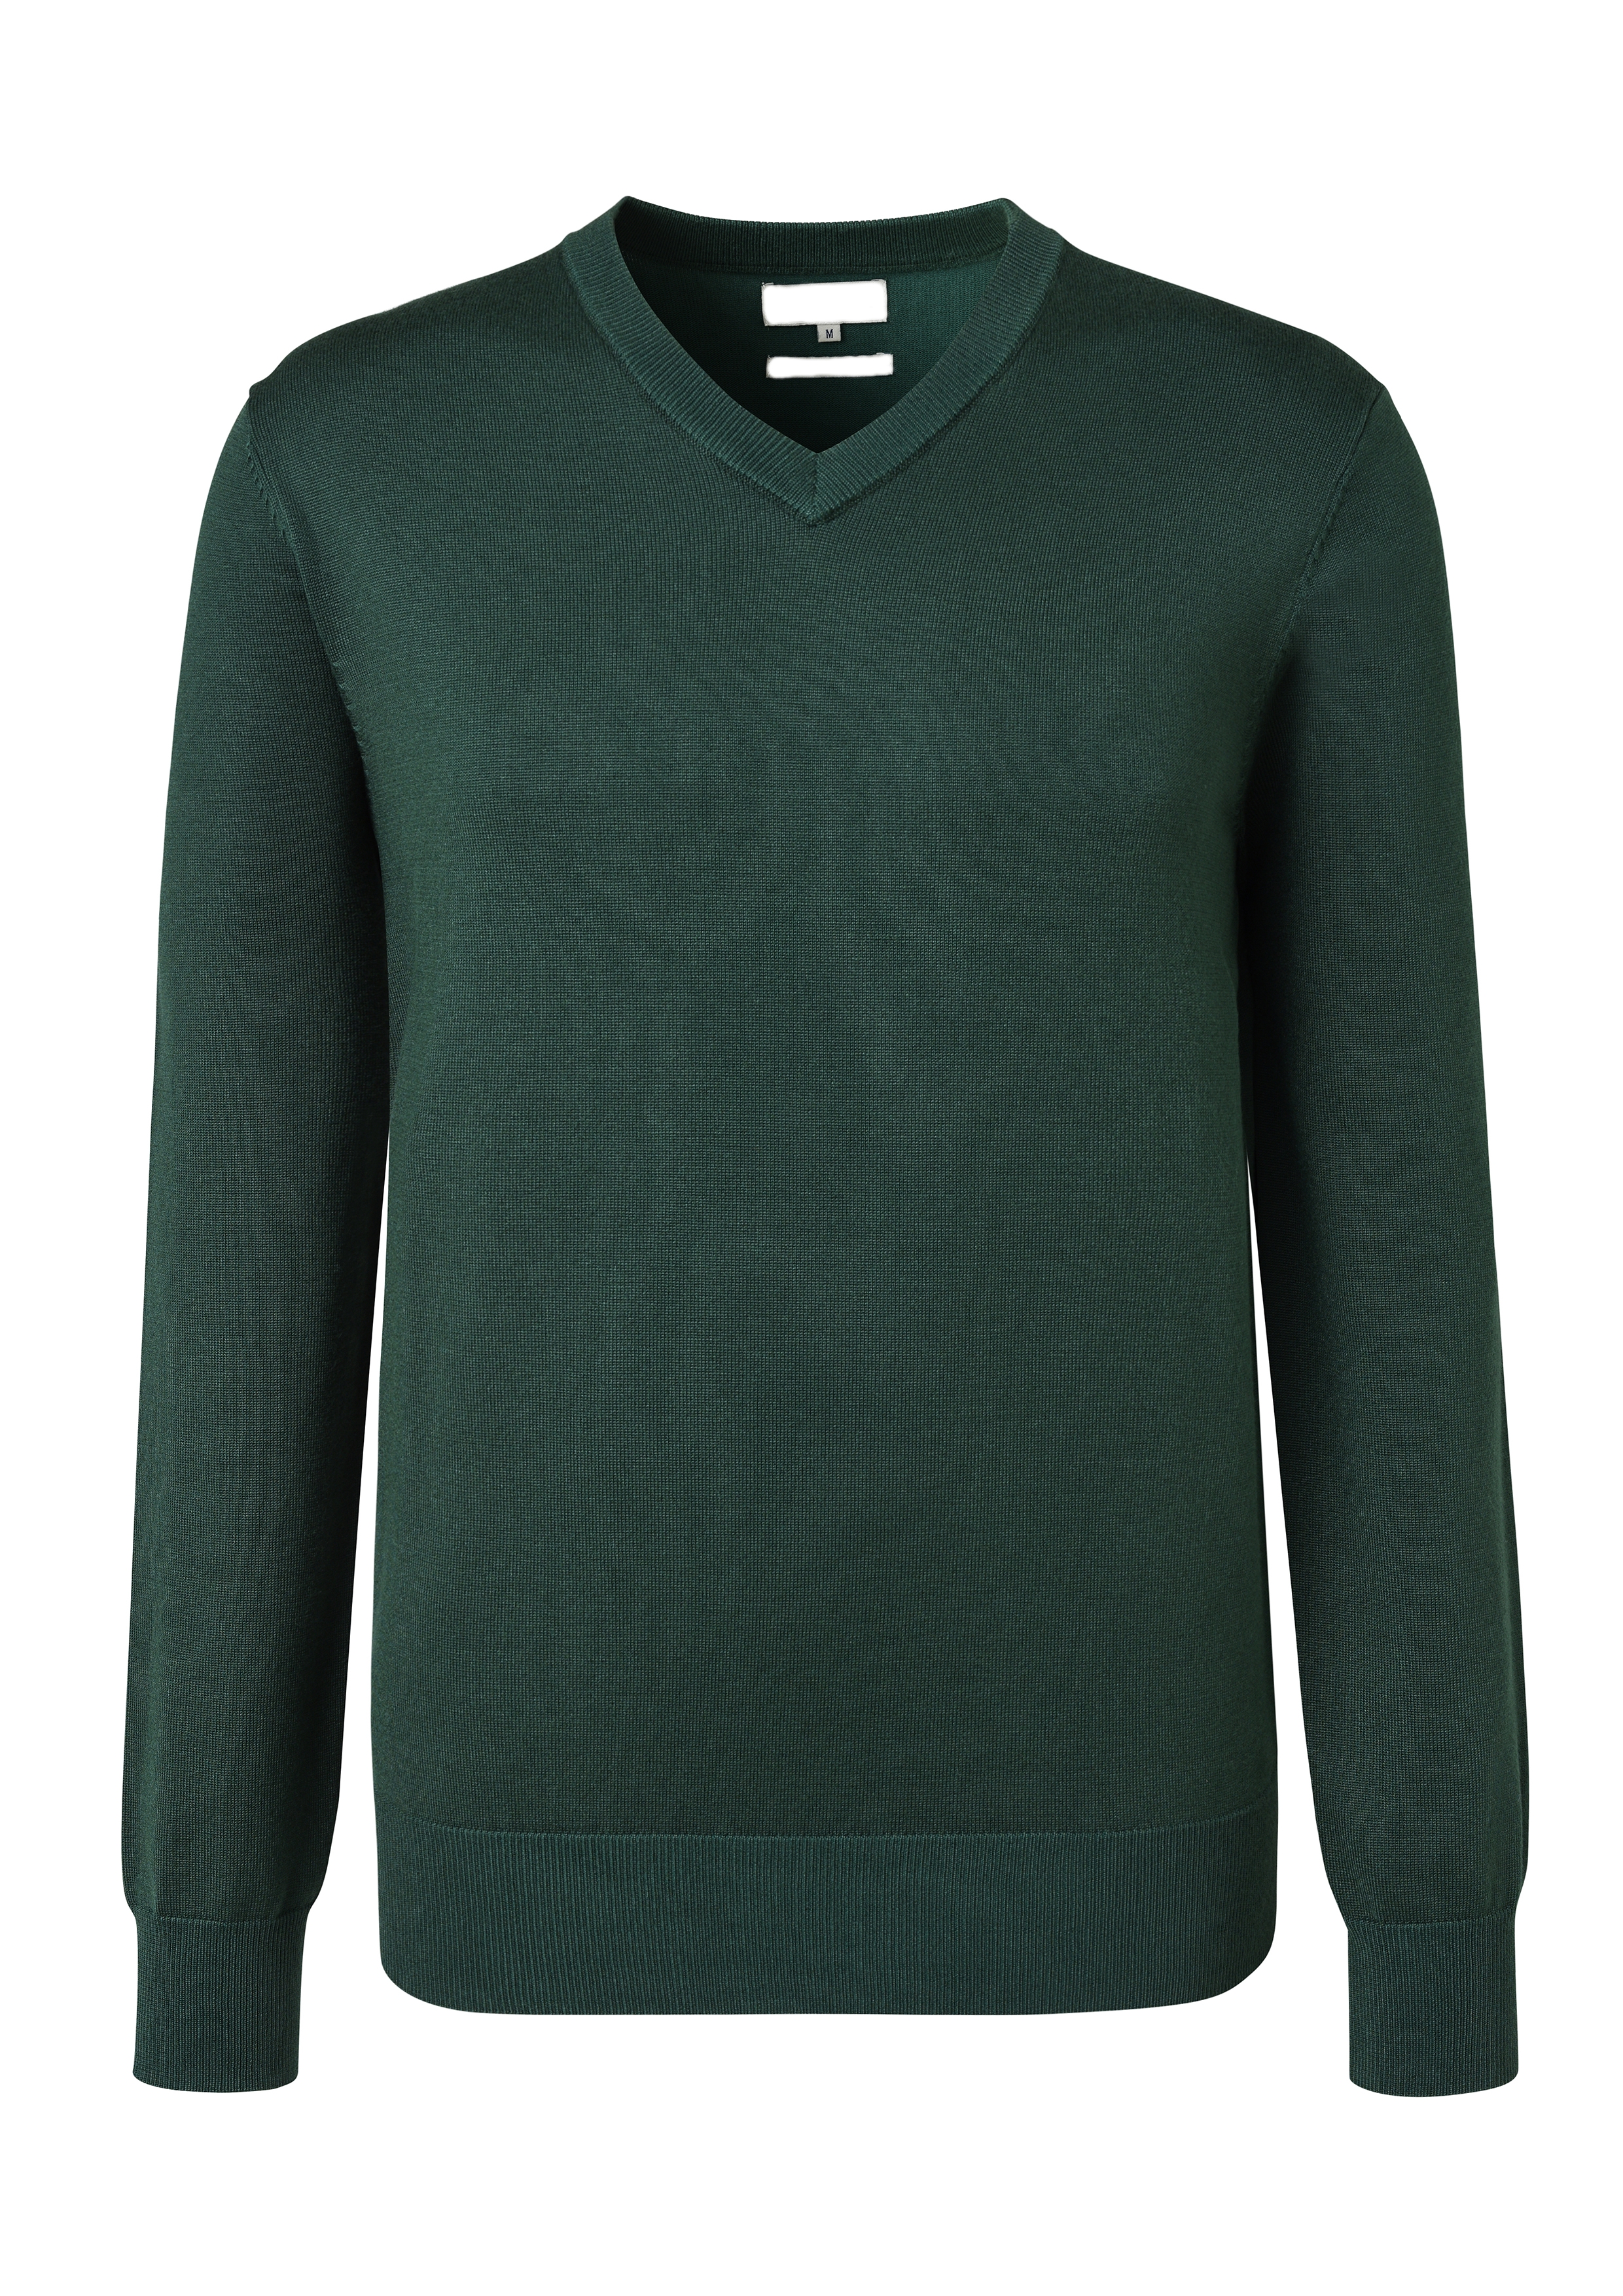 Factory Wholesale Green Hand Knitted Wool Plain Long Sleeve Men's V-neck Sweater